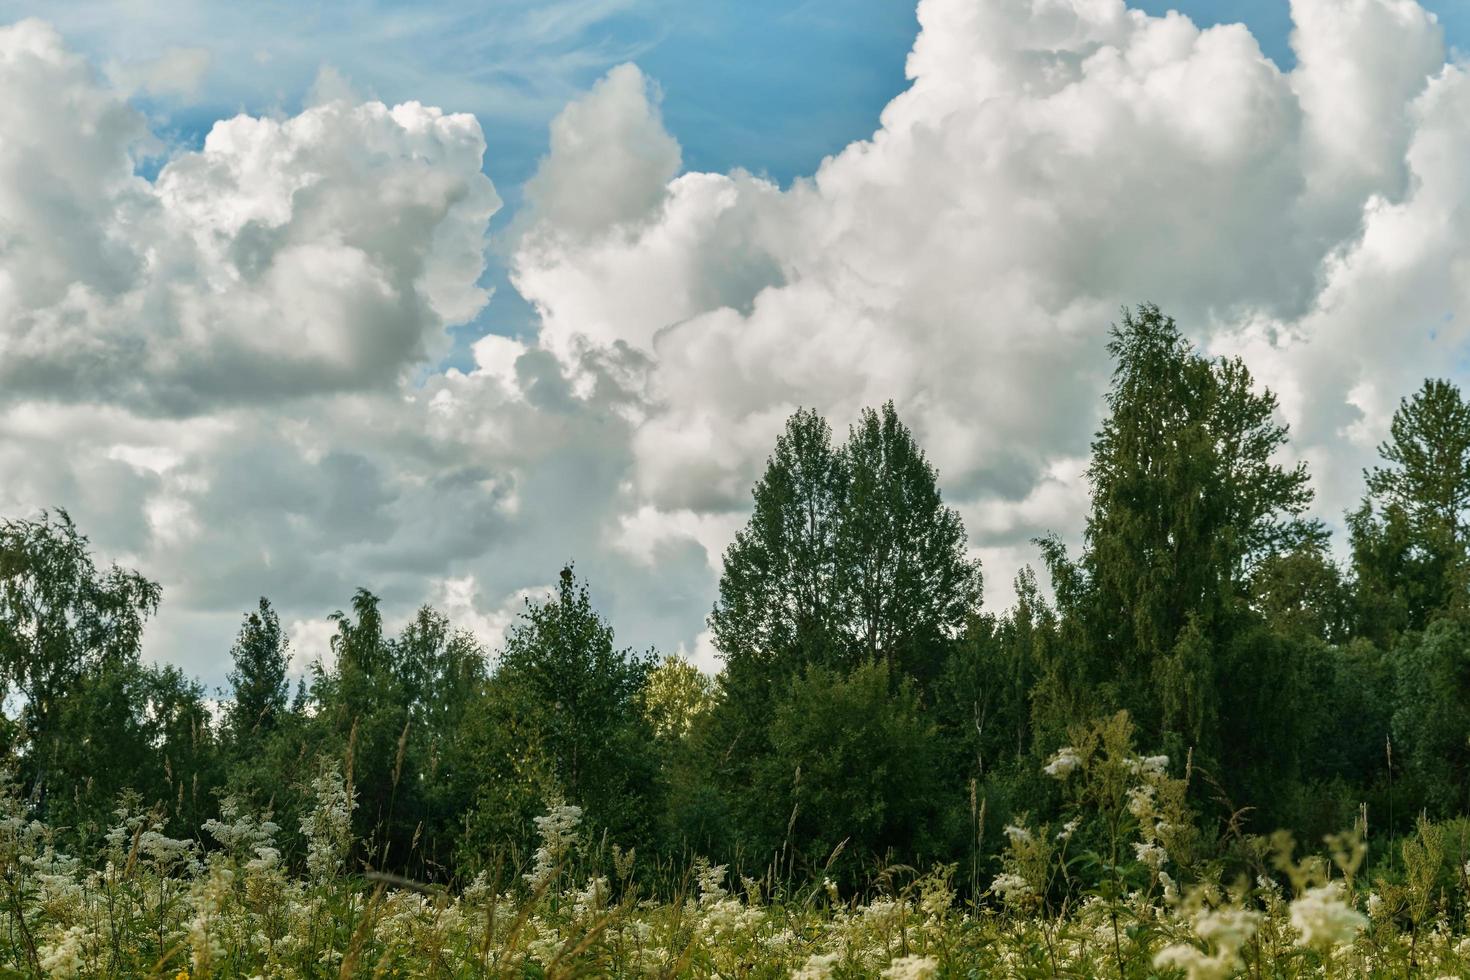 Midsummer deciduous forest, summer grass bloom, sky covered with cumulus clouds, cloudy day, forest ecosystem background or banner, care for nature, ecology and climate change issues photo